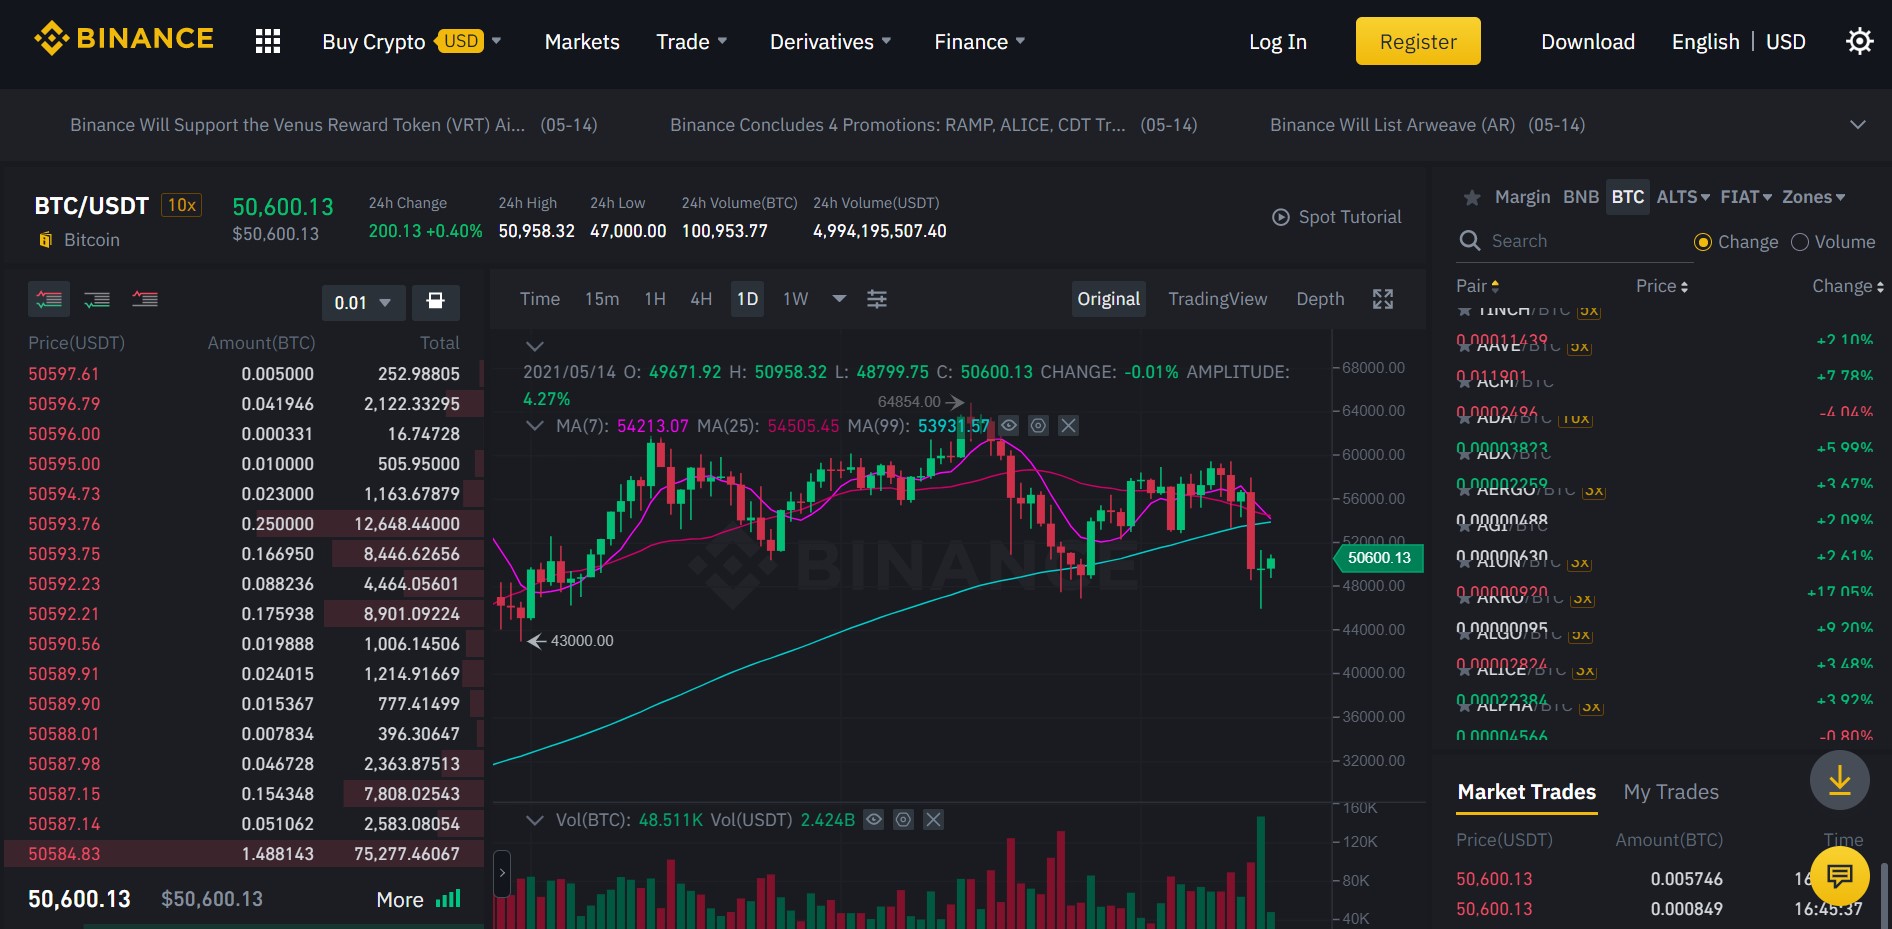 Binance User Interface and Experience